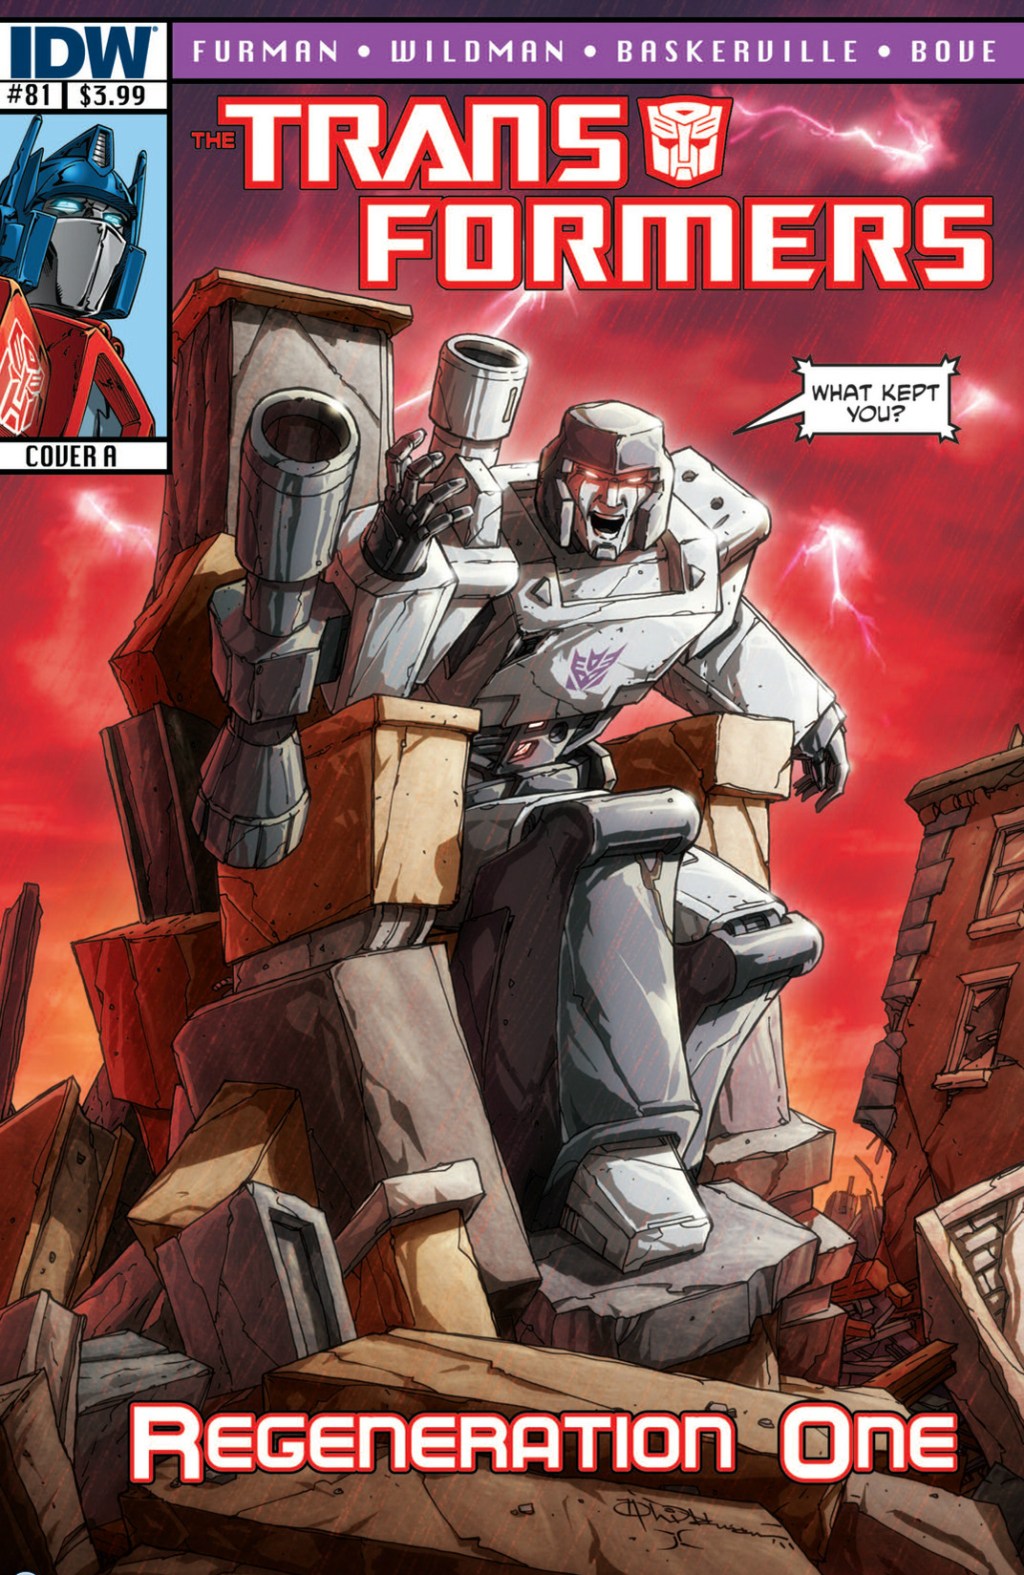 The Transformers Regeneration One #81 "Loose Ends, Part 1" (2012), IDW Publishing. Words by Simon Furman. Art by Andrew Wildman, Stephen Baskerville, and John-Paul Bove.